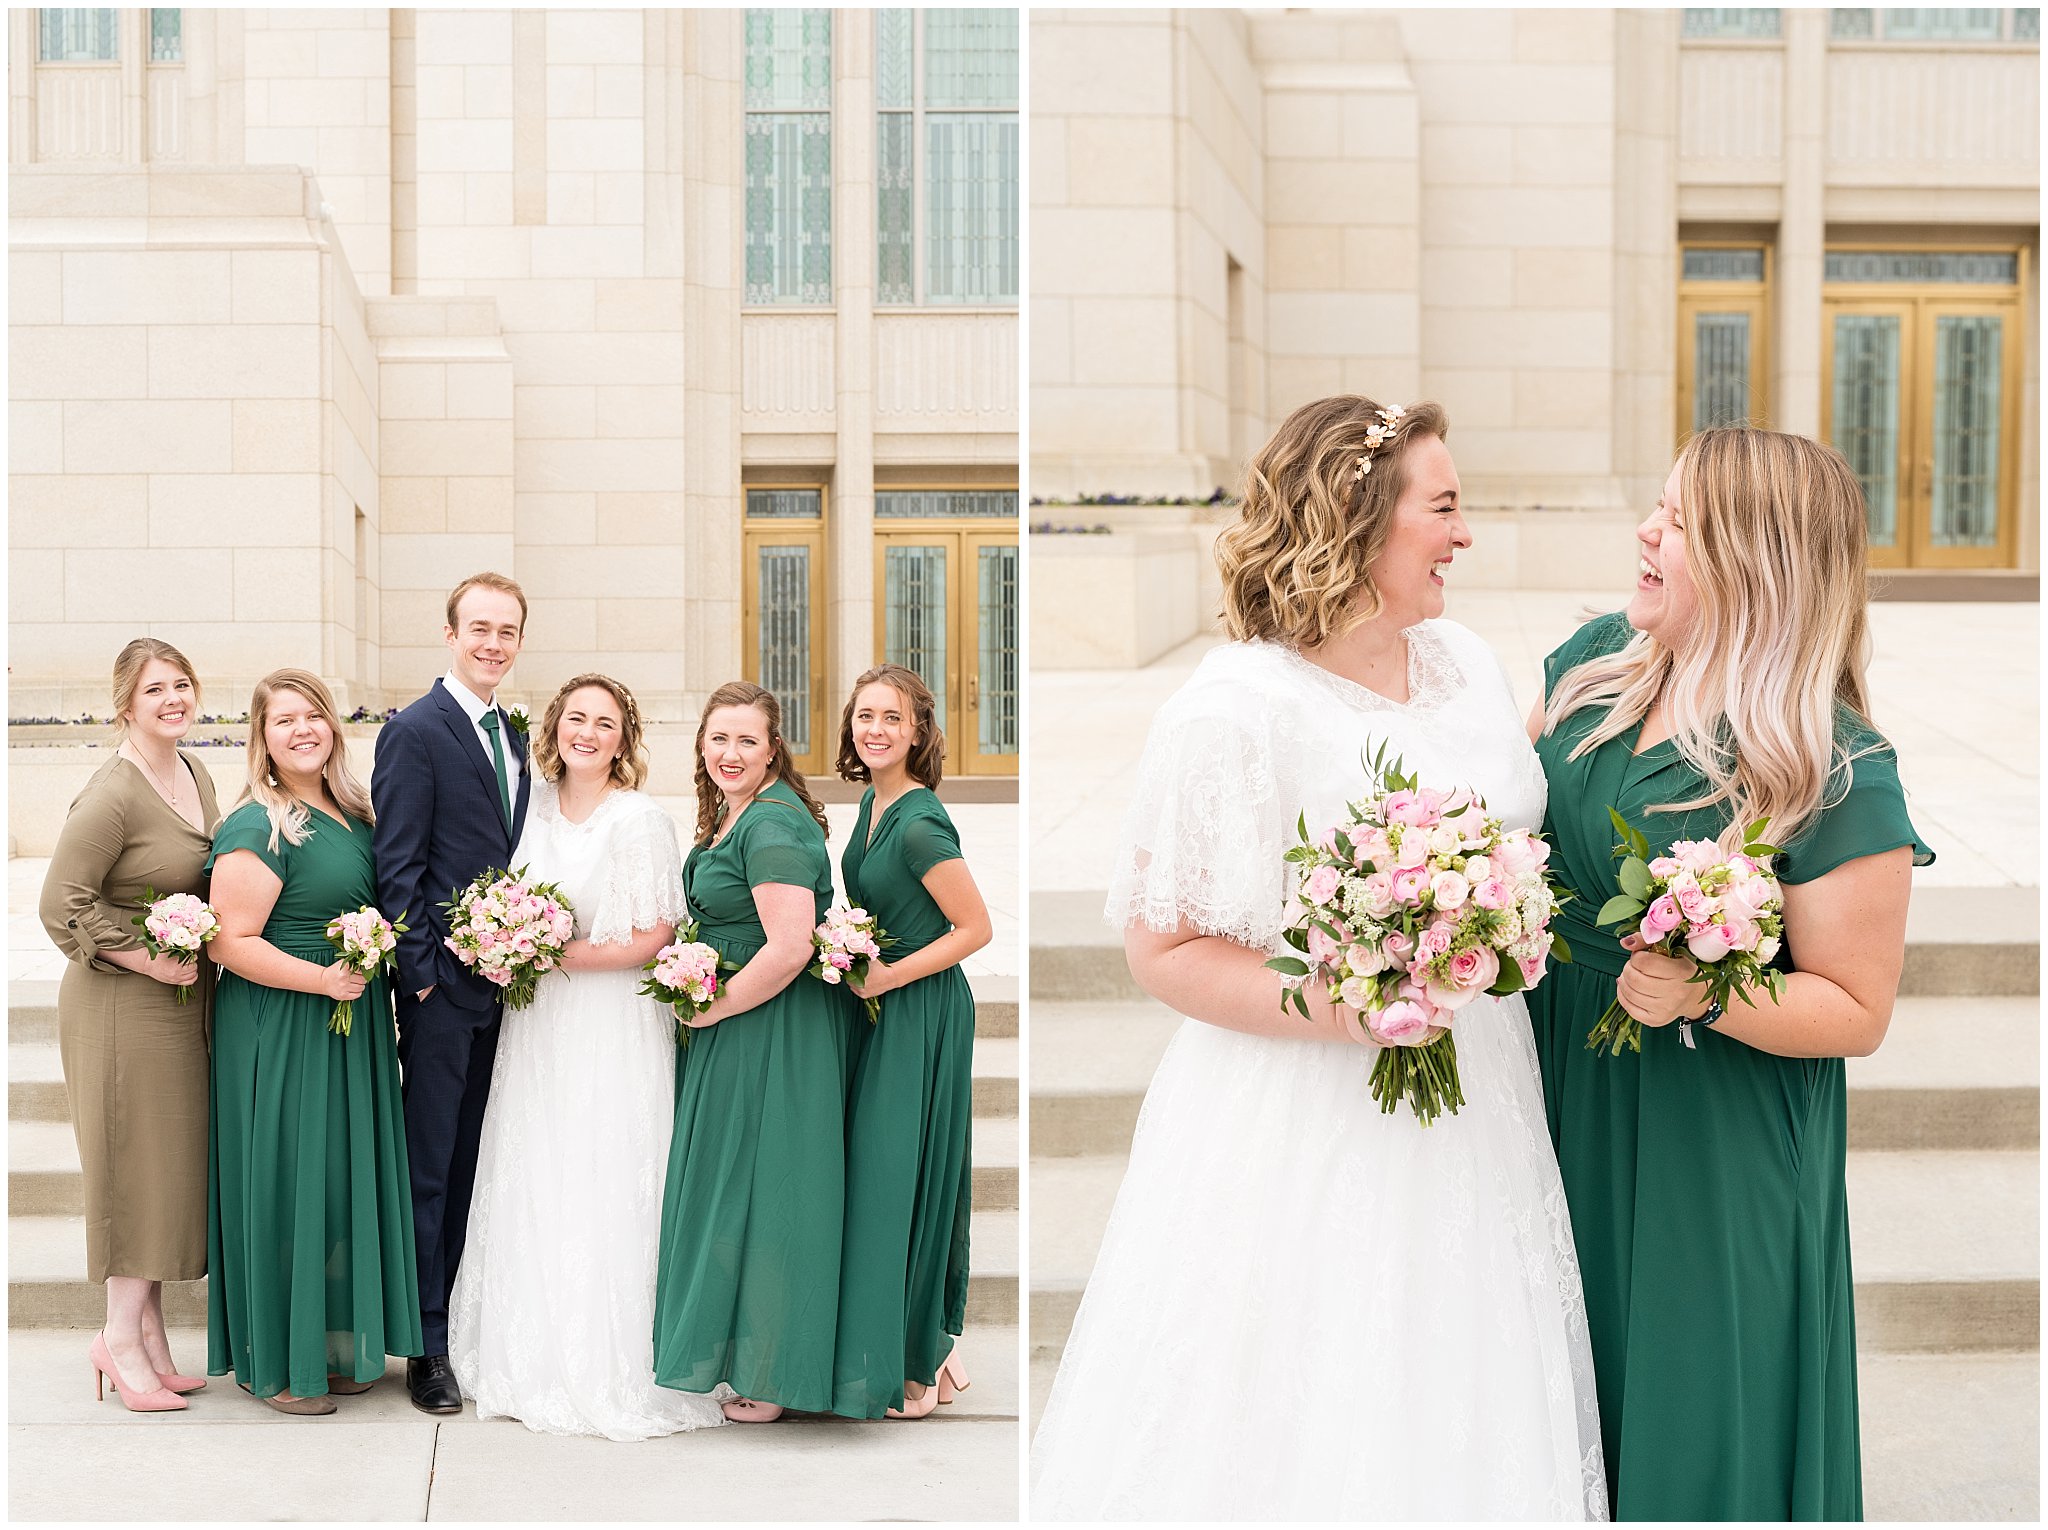 Bride and groom with bridesmaids | Ogden Temple Winter Wedding | Emerald Green and Pink Wedding | Jessie and Dallin Photography